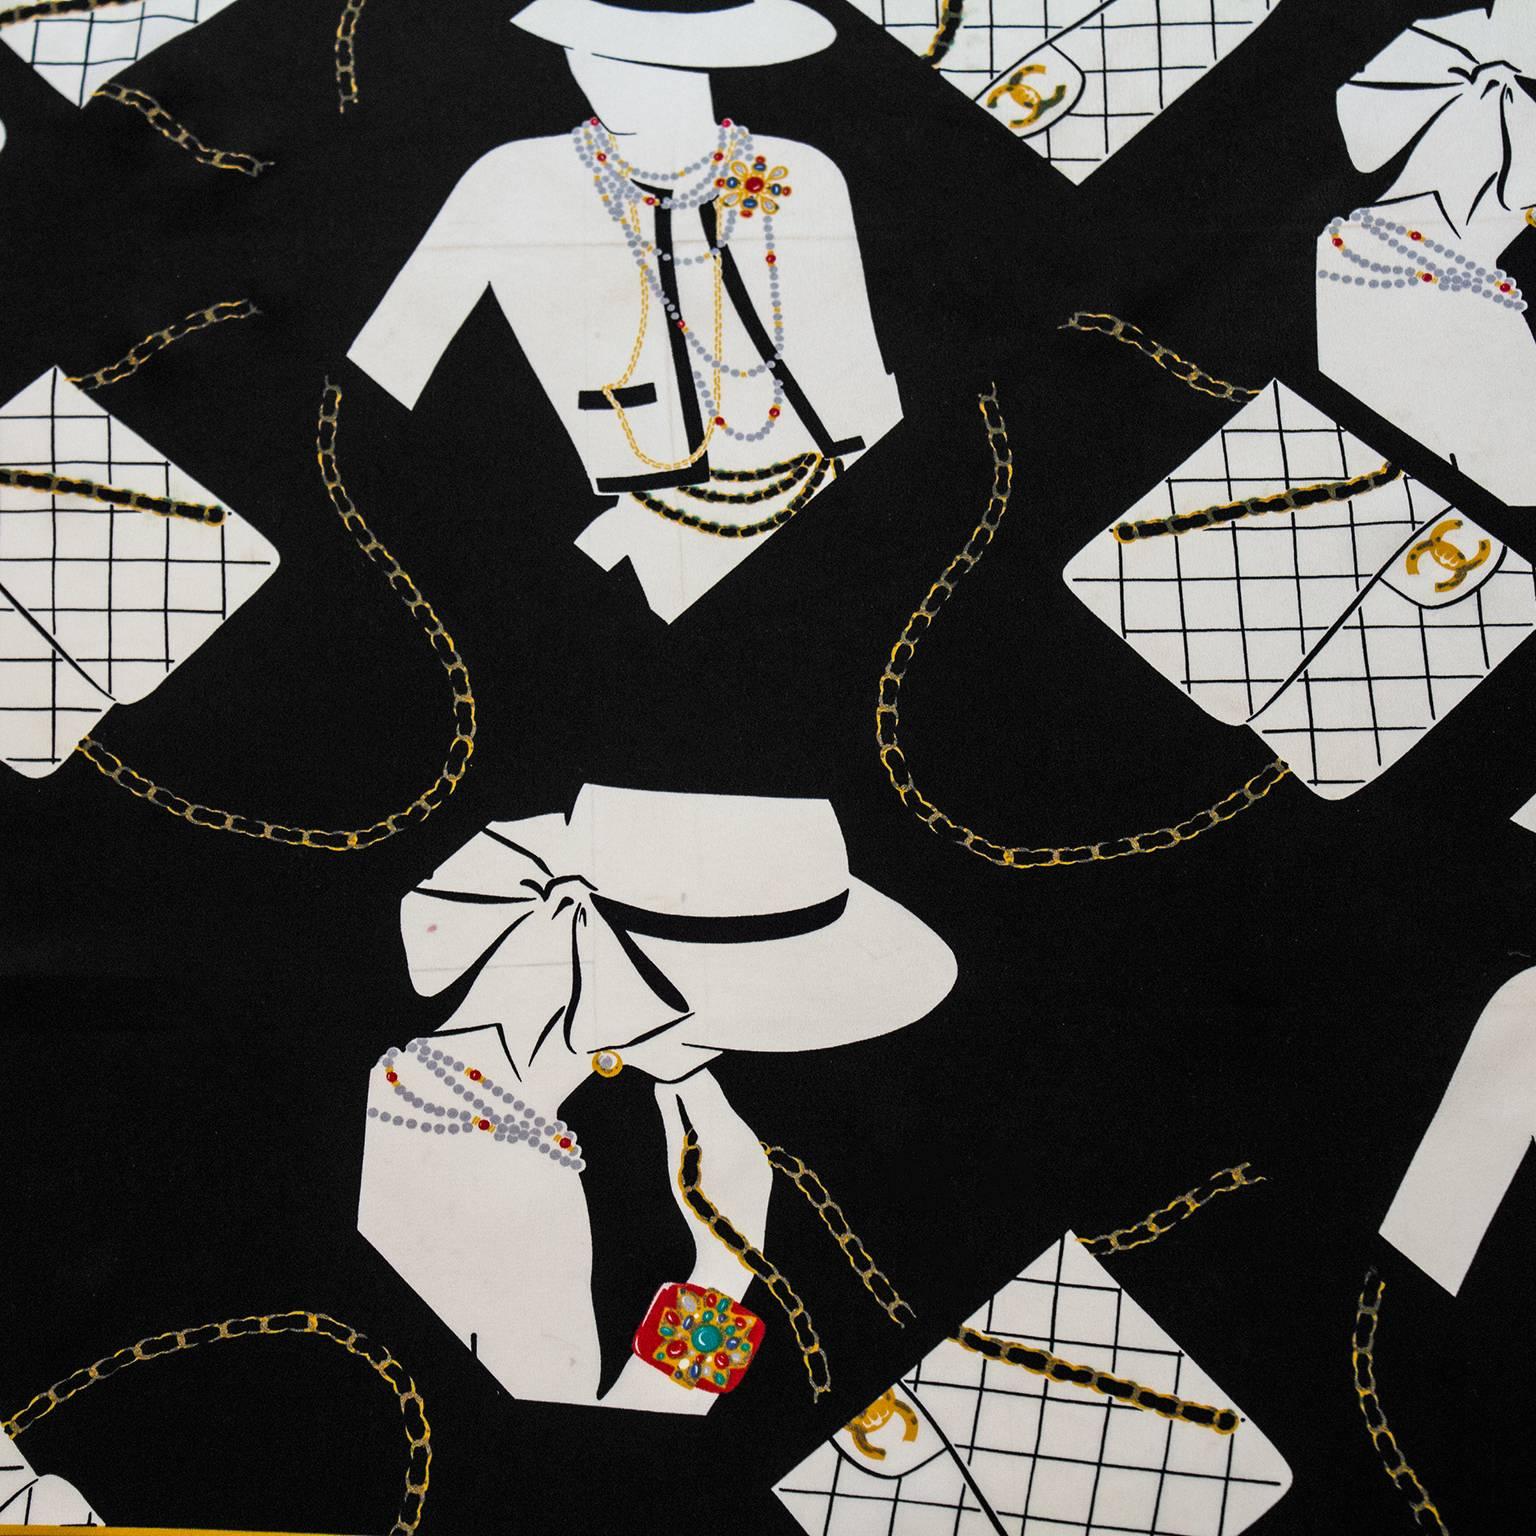 Elegant Chanel silk scarf dating from the 1980s. Black with accents of gold and red and graphic of Coco Chanel with the 2.55 quilted Chanel bag. Both iconic images for the brand. In excellent vintage condition. 

33